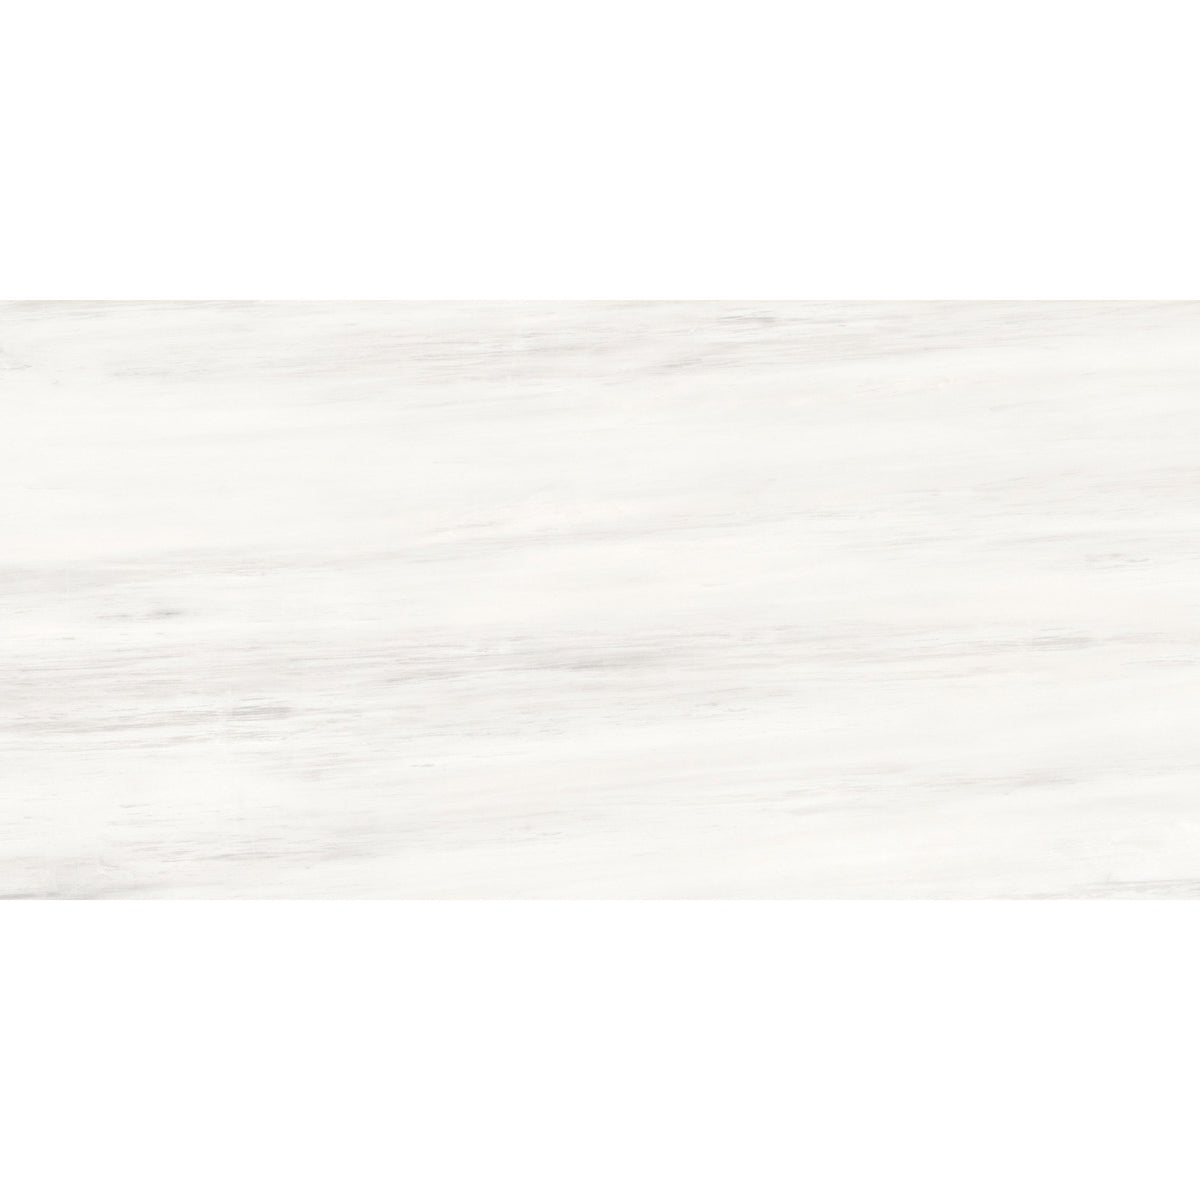 Anatolia Mayfair 16 in. x 32 in. HD Rectified Porcelain Tile - Suave Bianco (Polished)